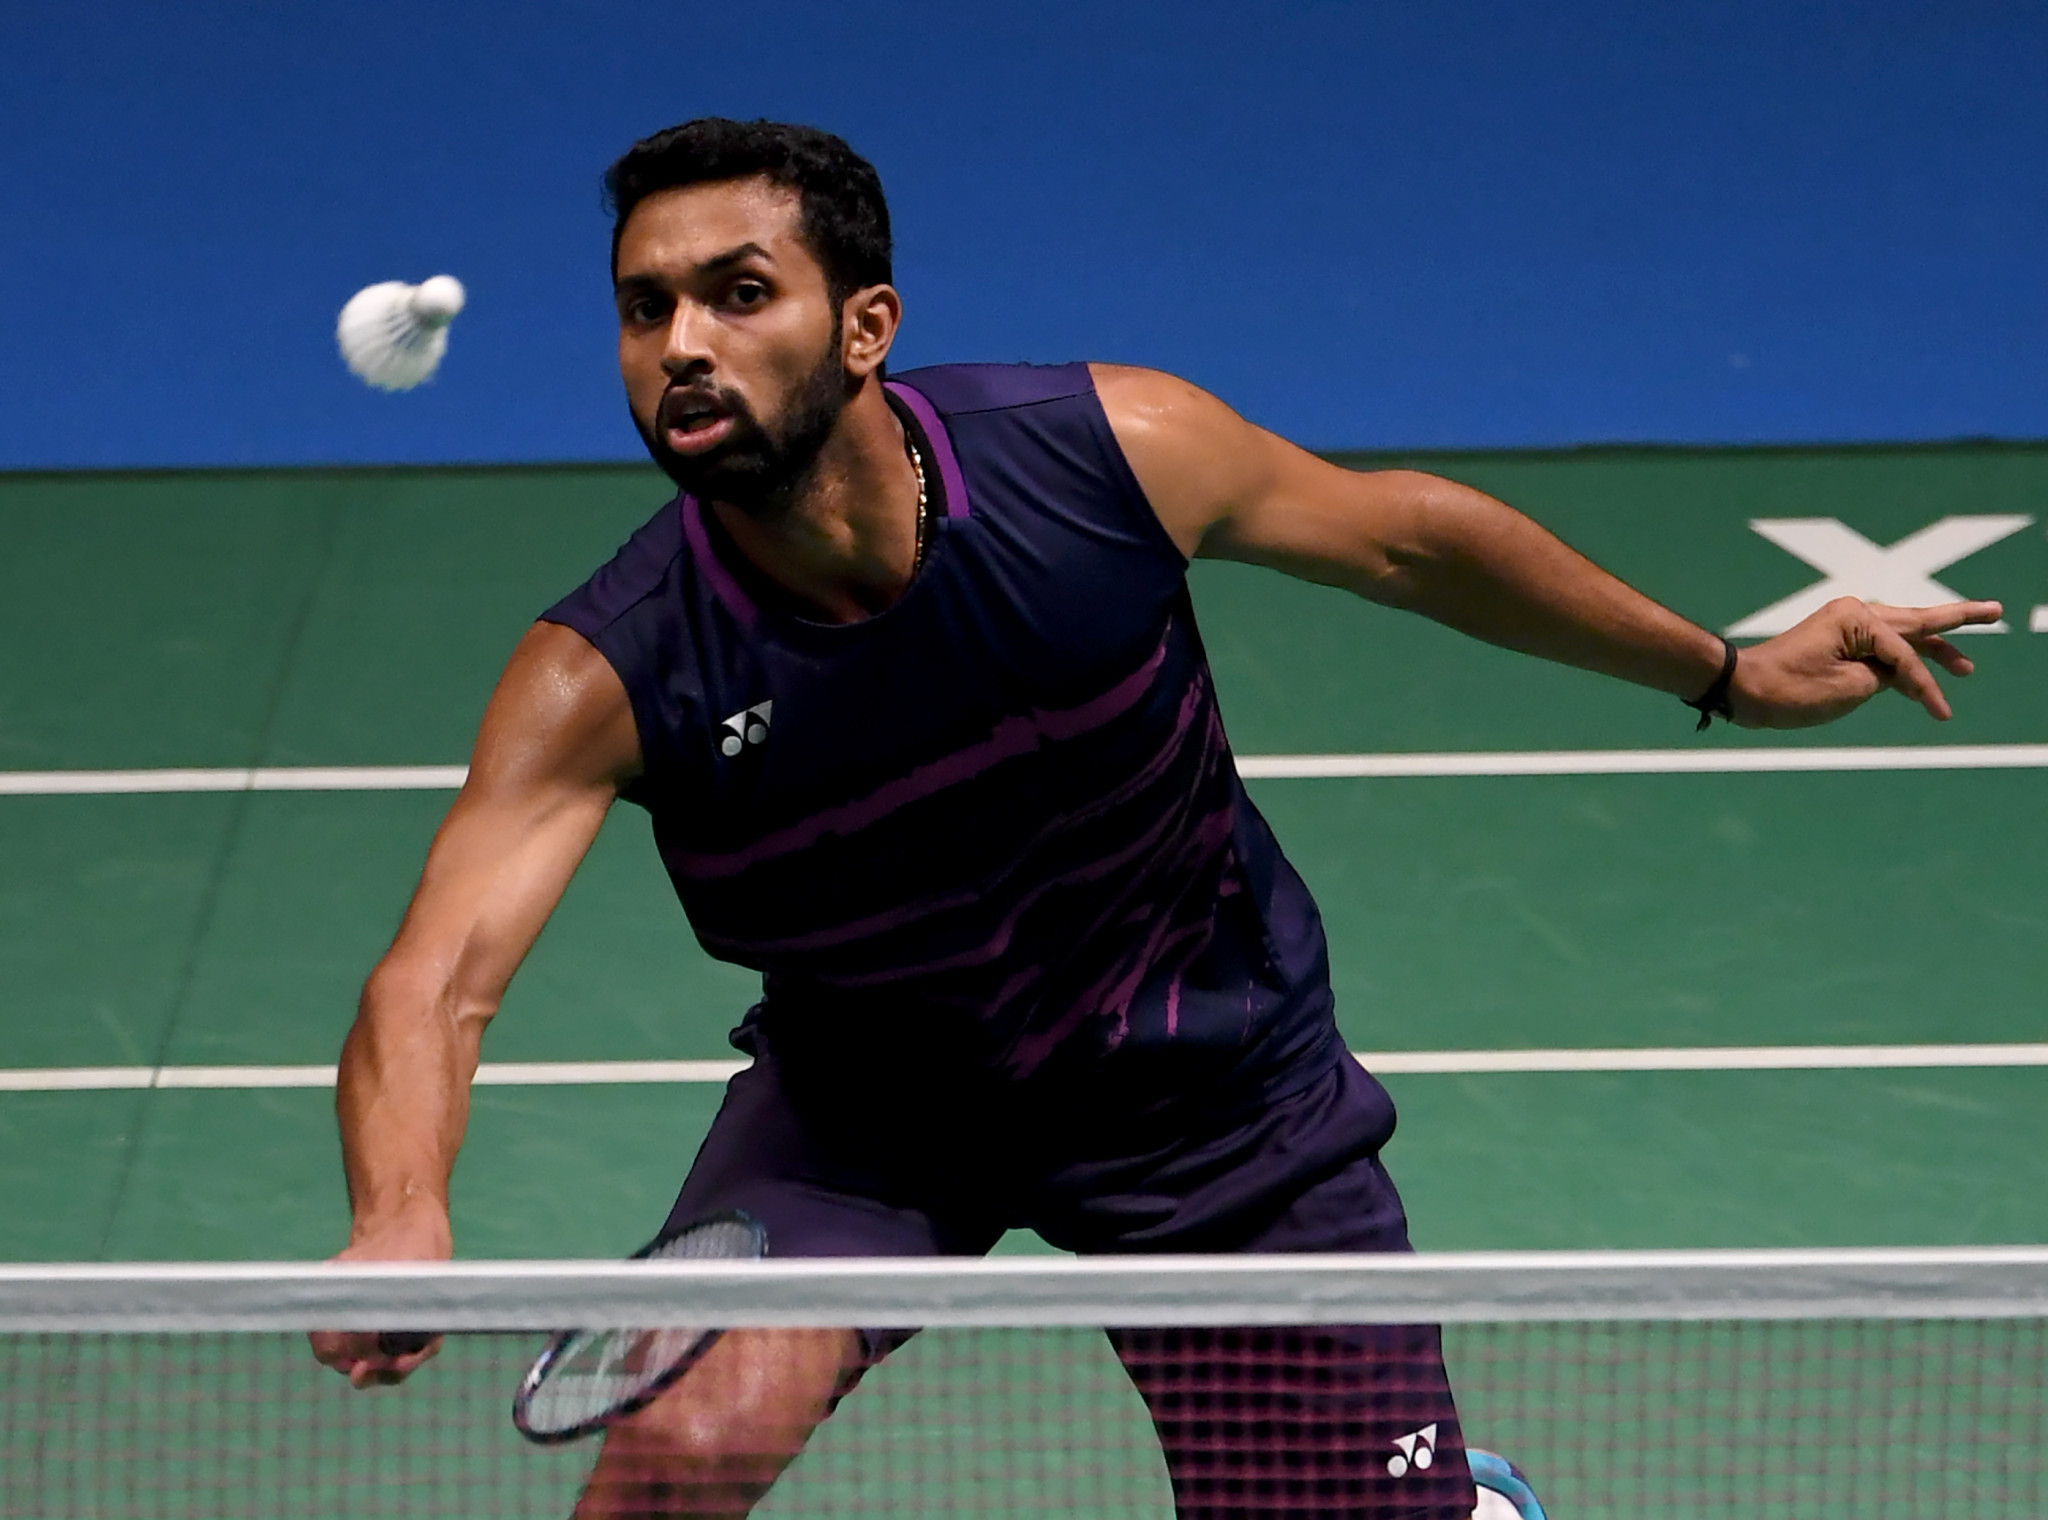 HS Prannoy will be making his Commonwealth Games debut at Gold Coast 2018 ©Getty Images